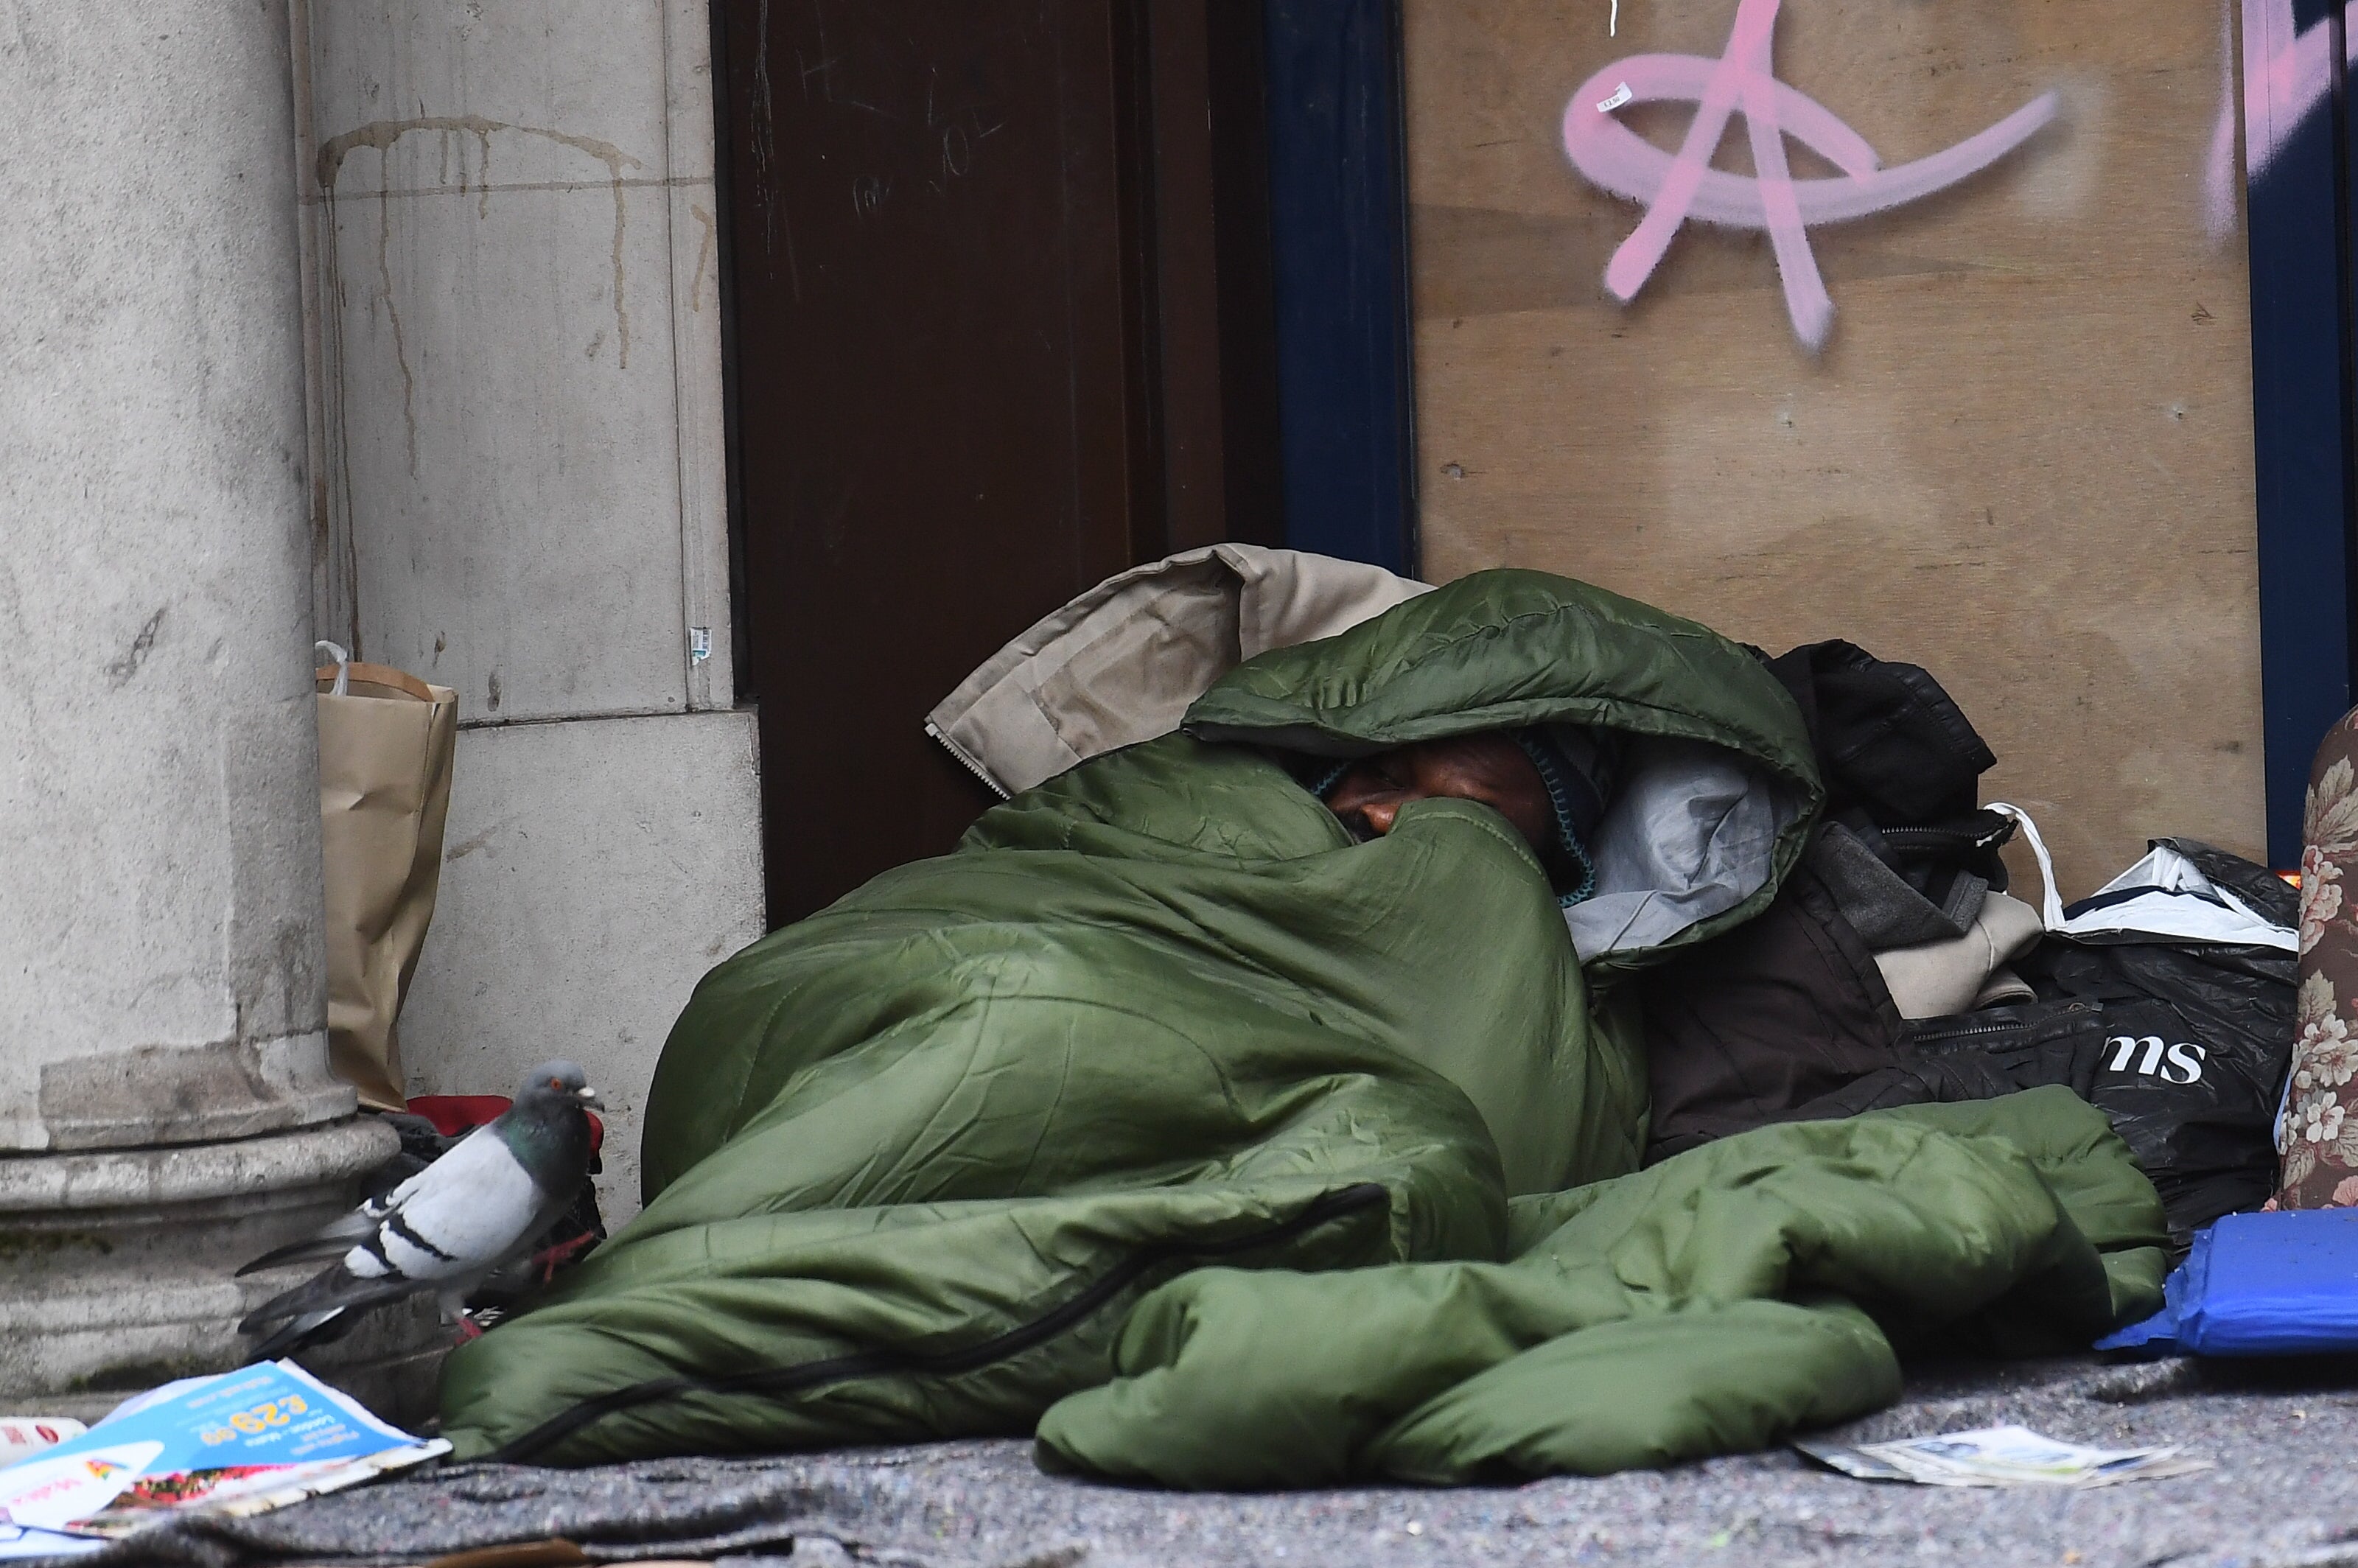 Government must act now to prevent ‘catastrophic’ homelessness crisis